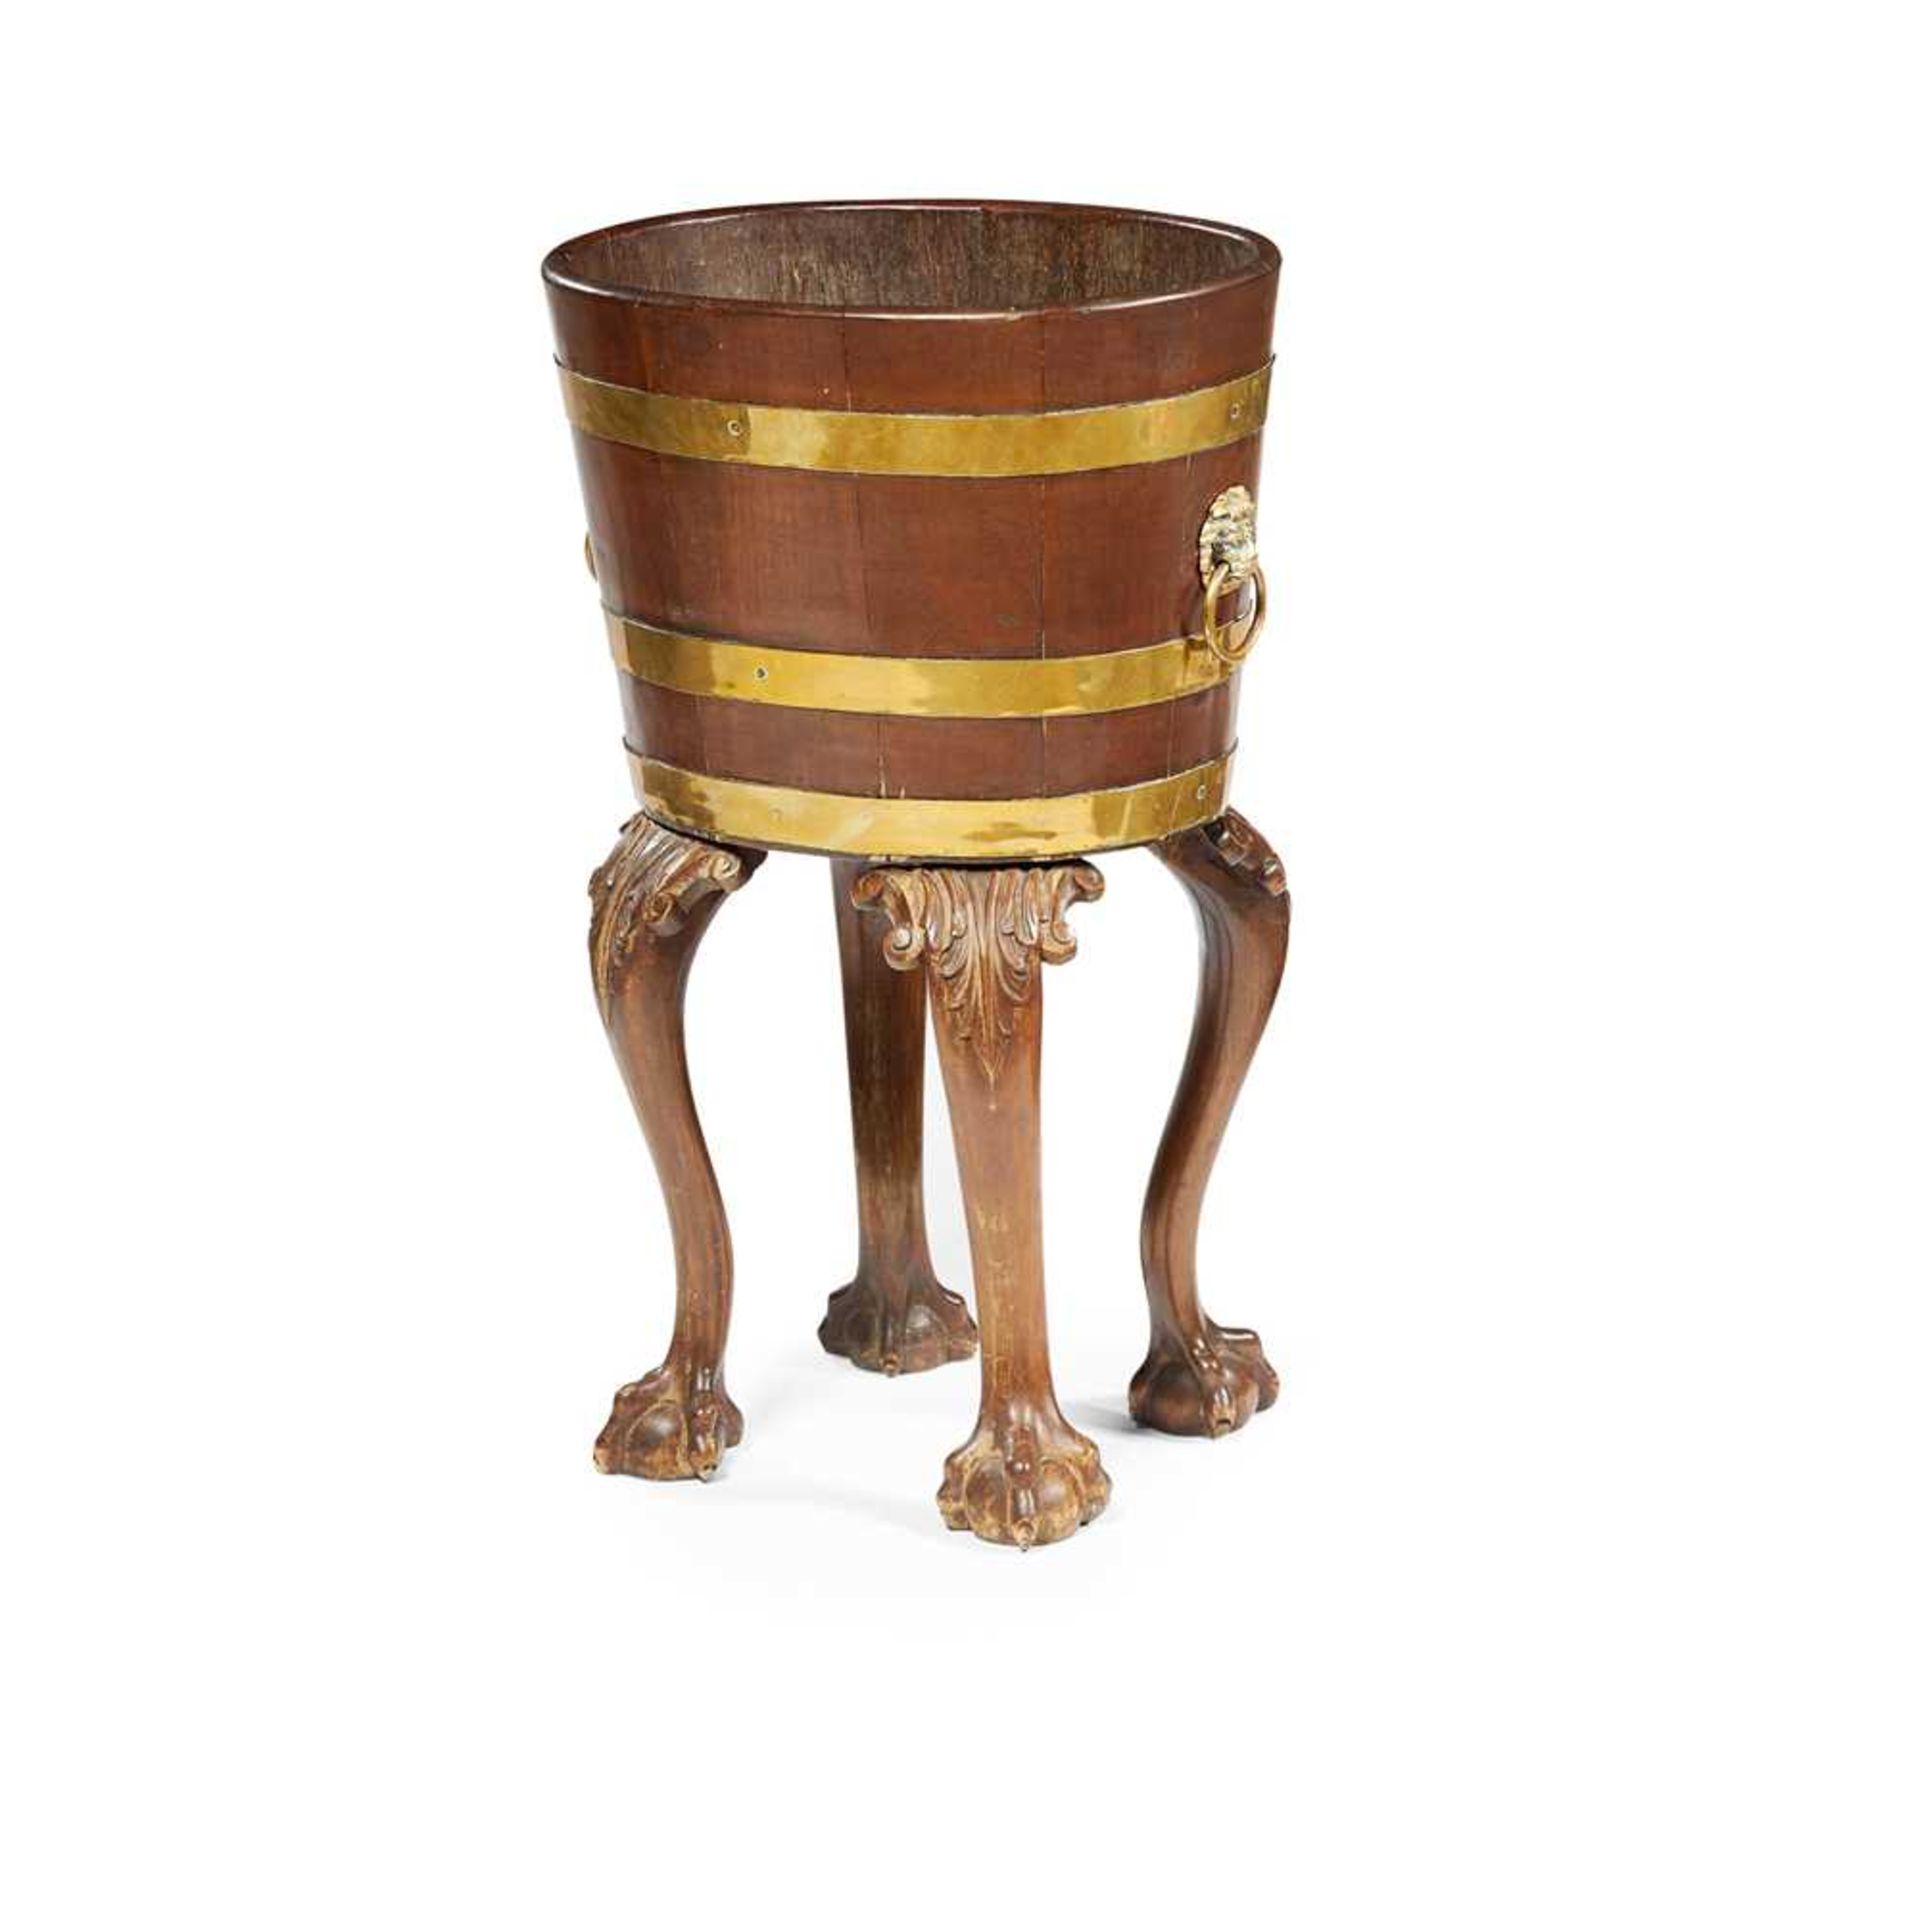 GEORGIAN MAHOGANY BRASS BANDED WINE COOLER 18TH CENTURY WITH ALTERATIONS